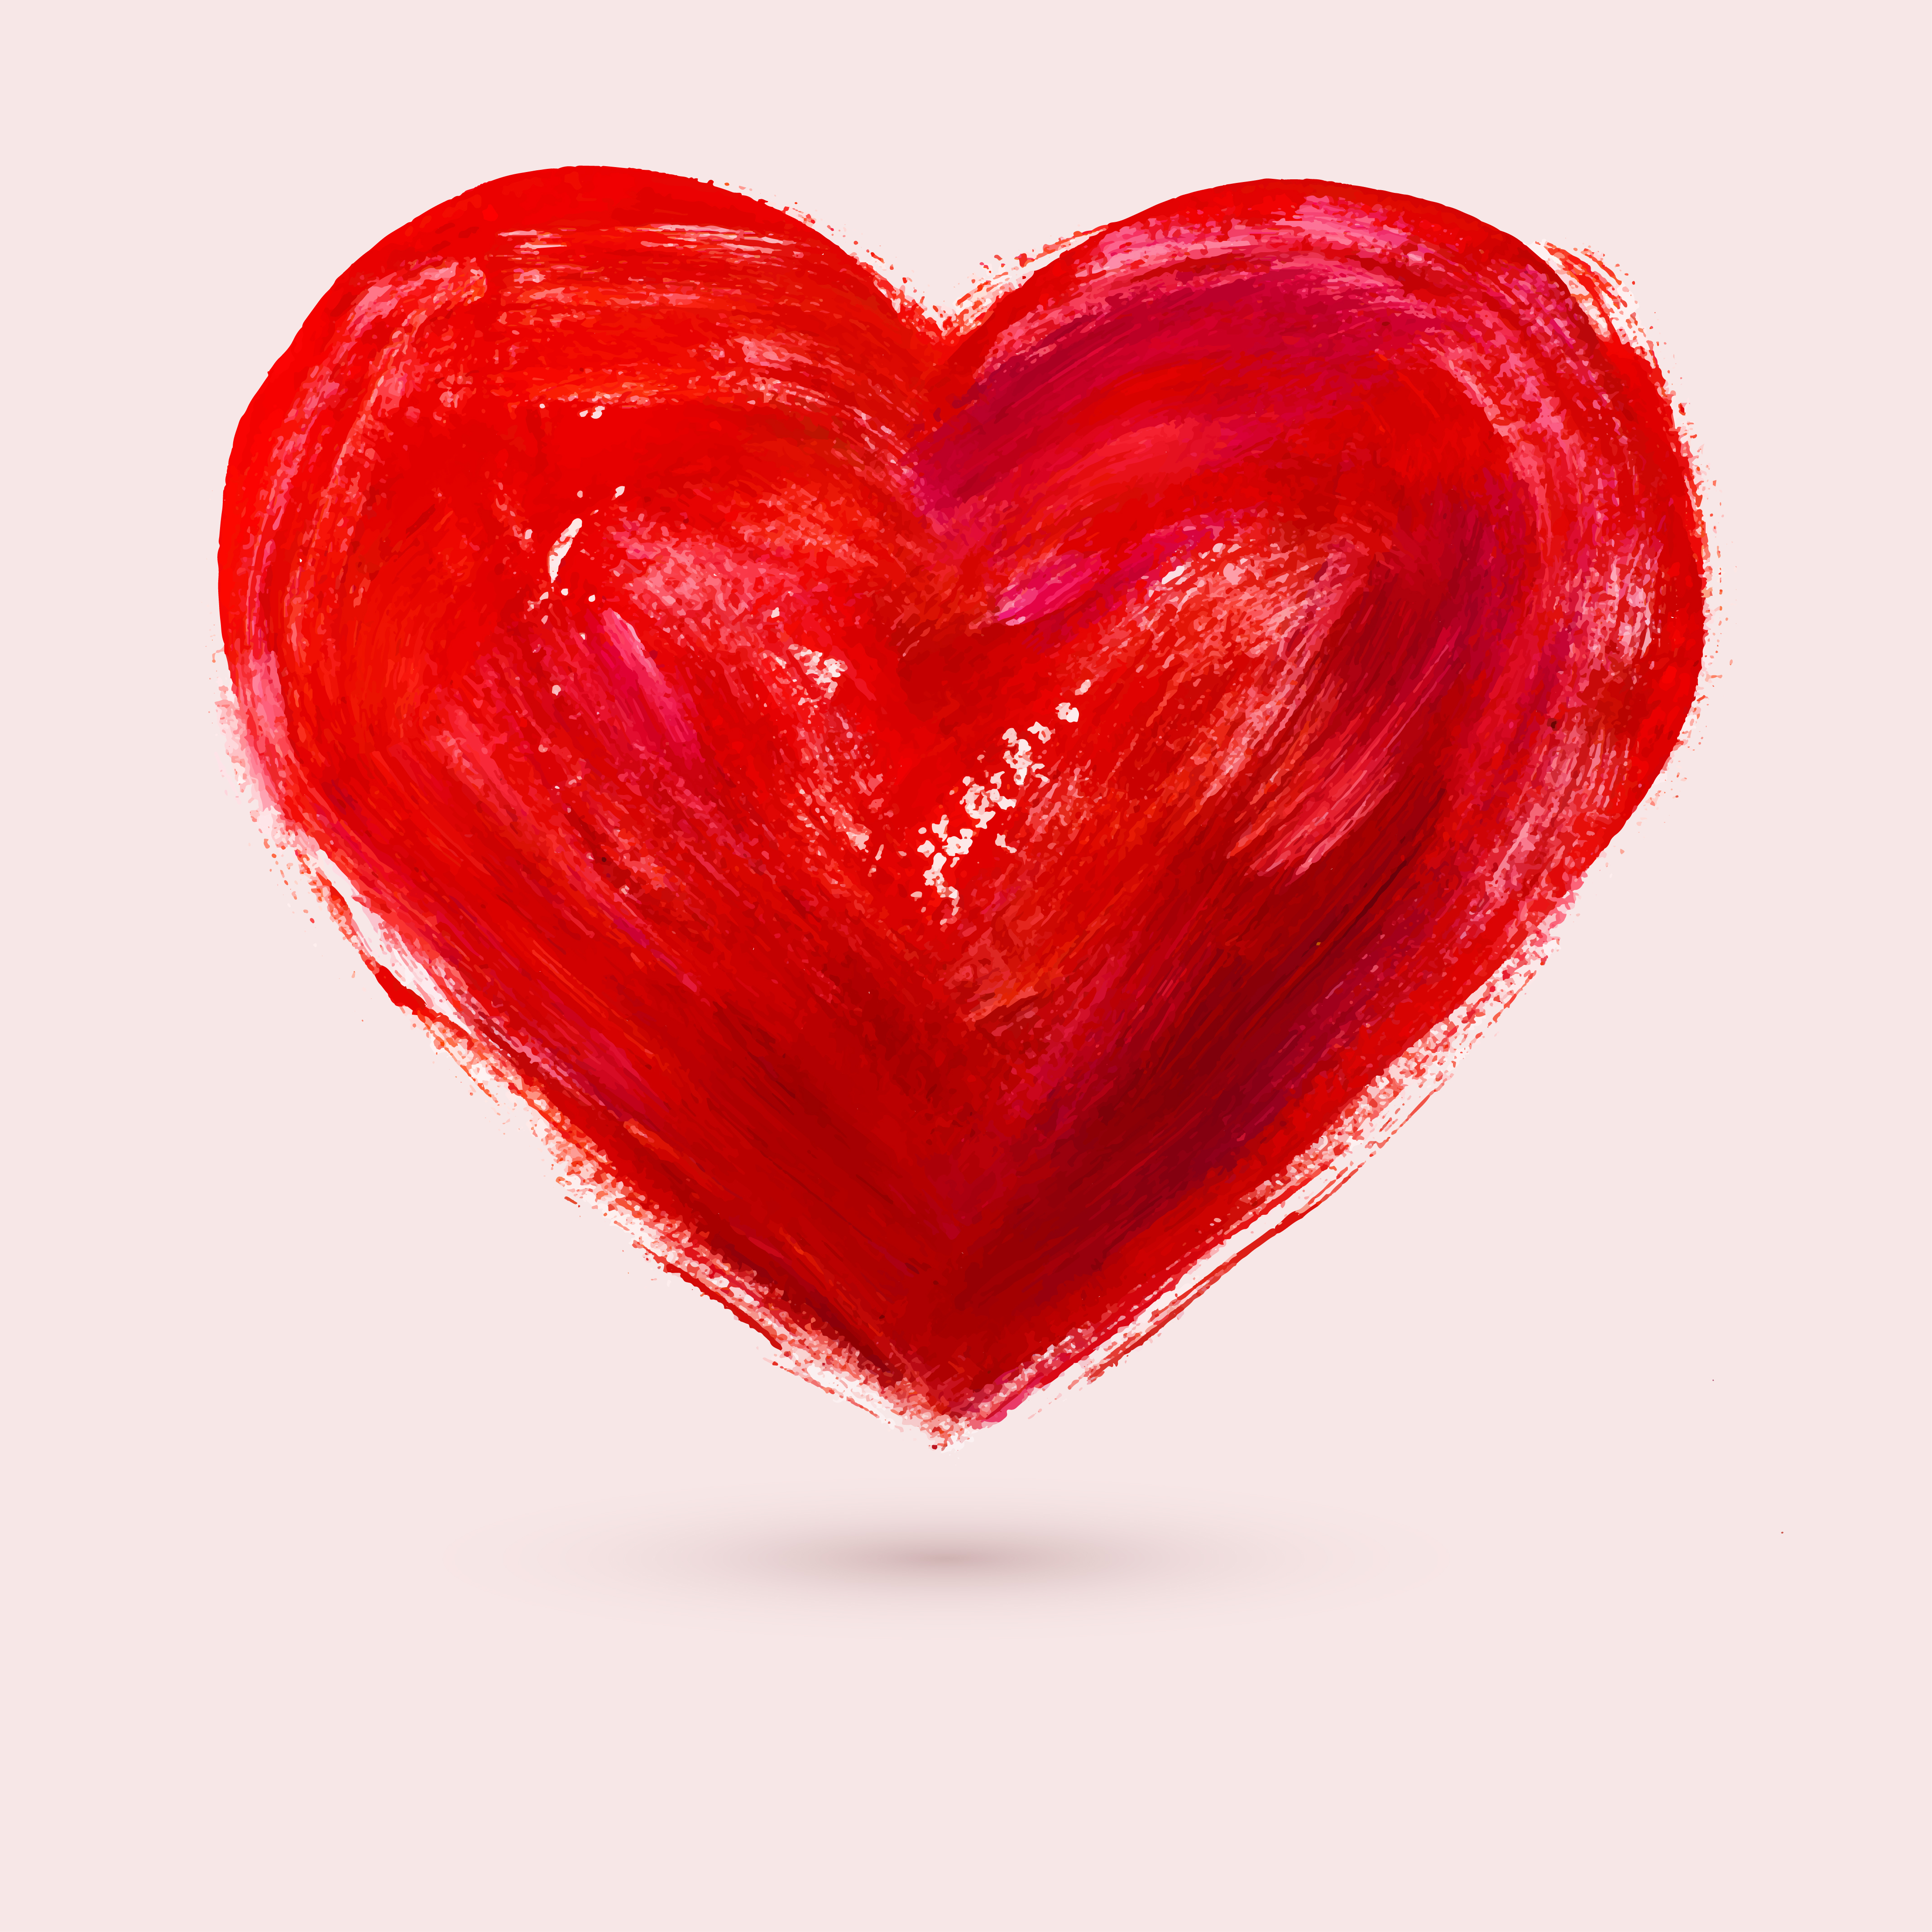 Download Watercolor heart, vector illustration - Fiercely50ish